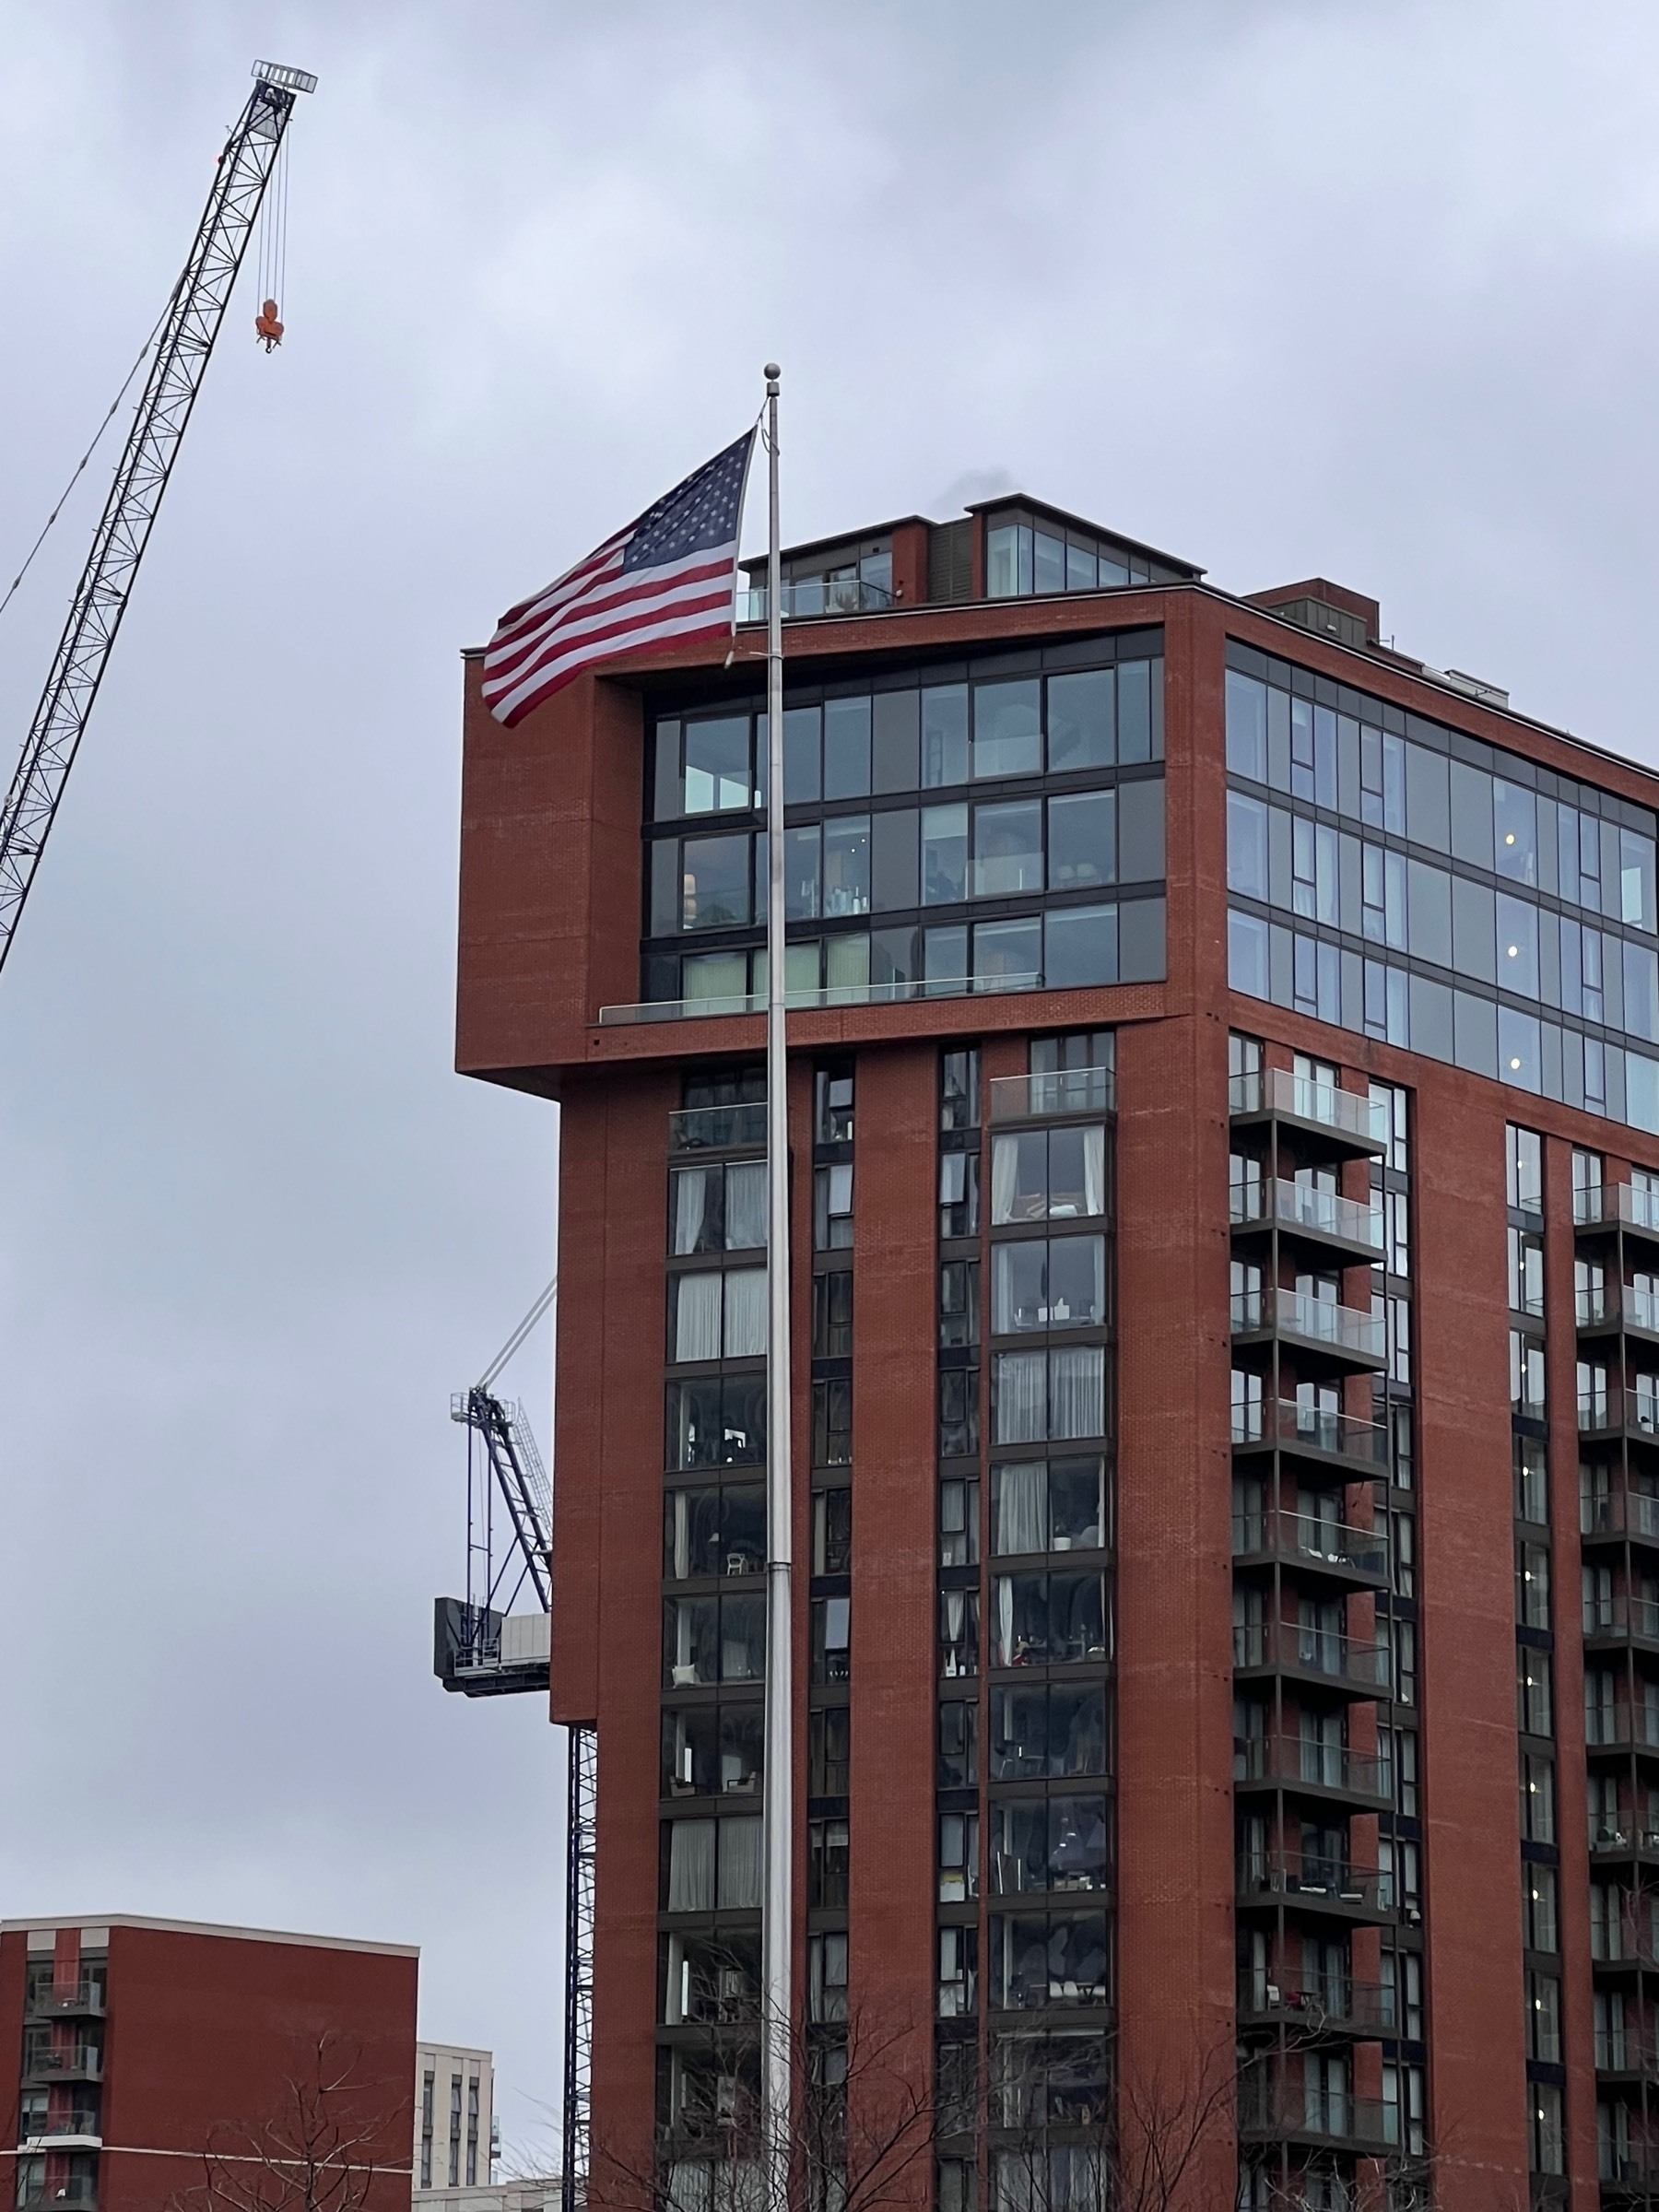 A US flag flying 